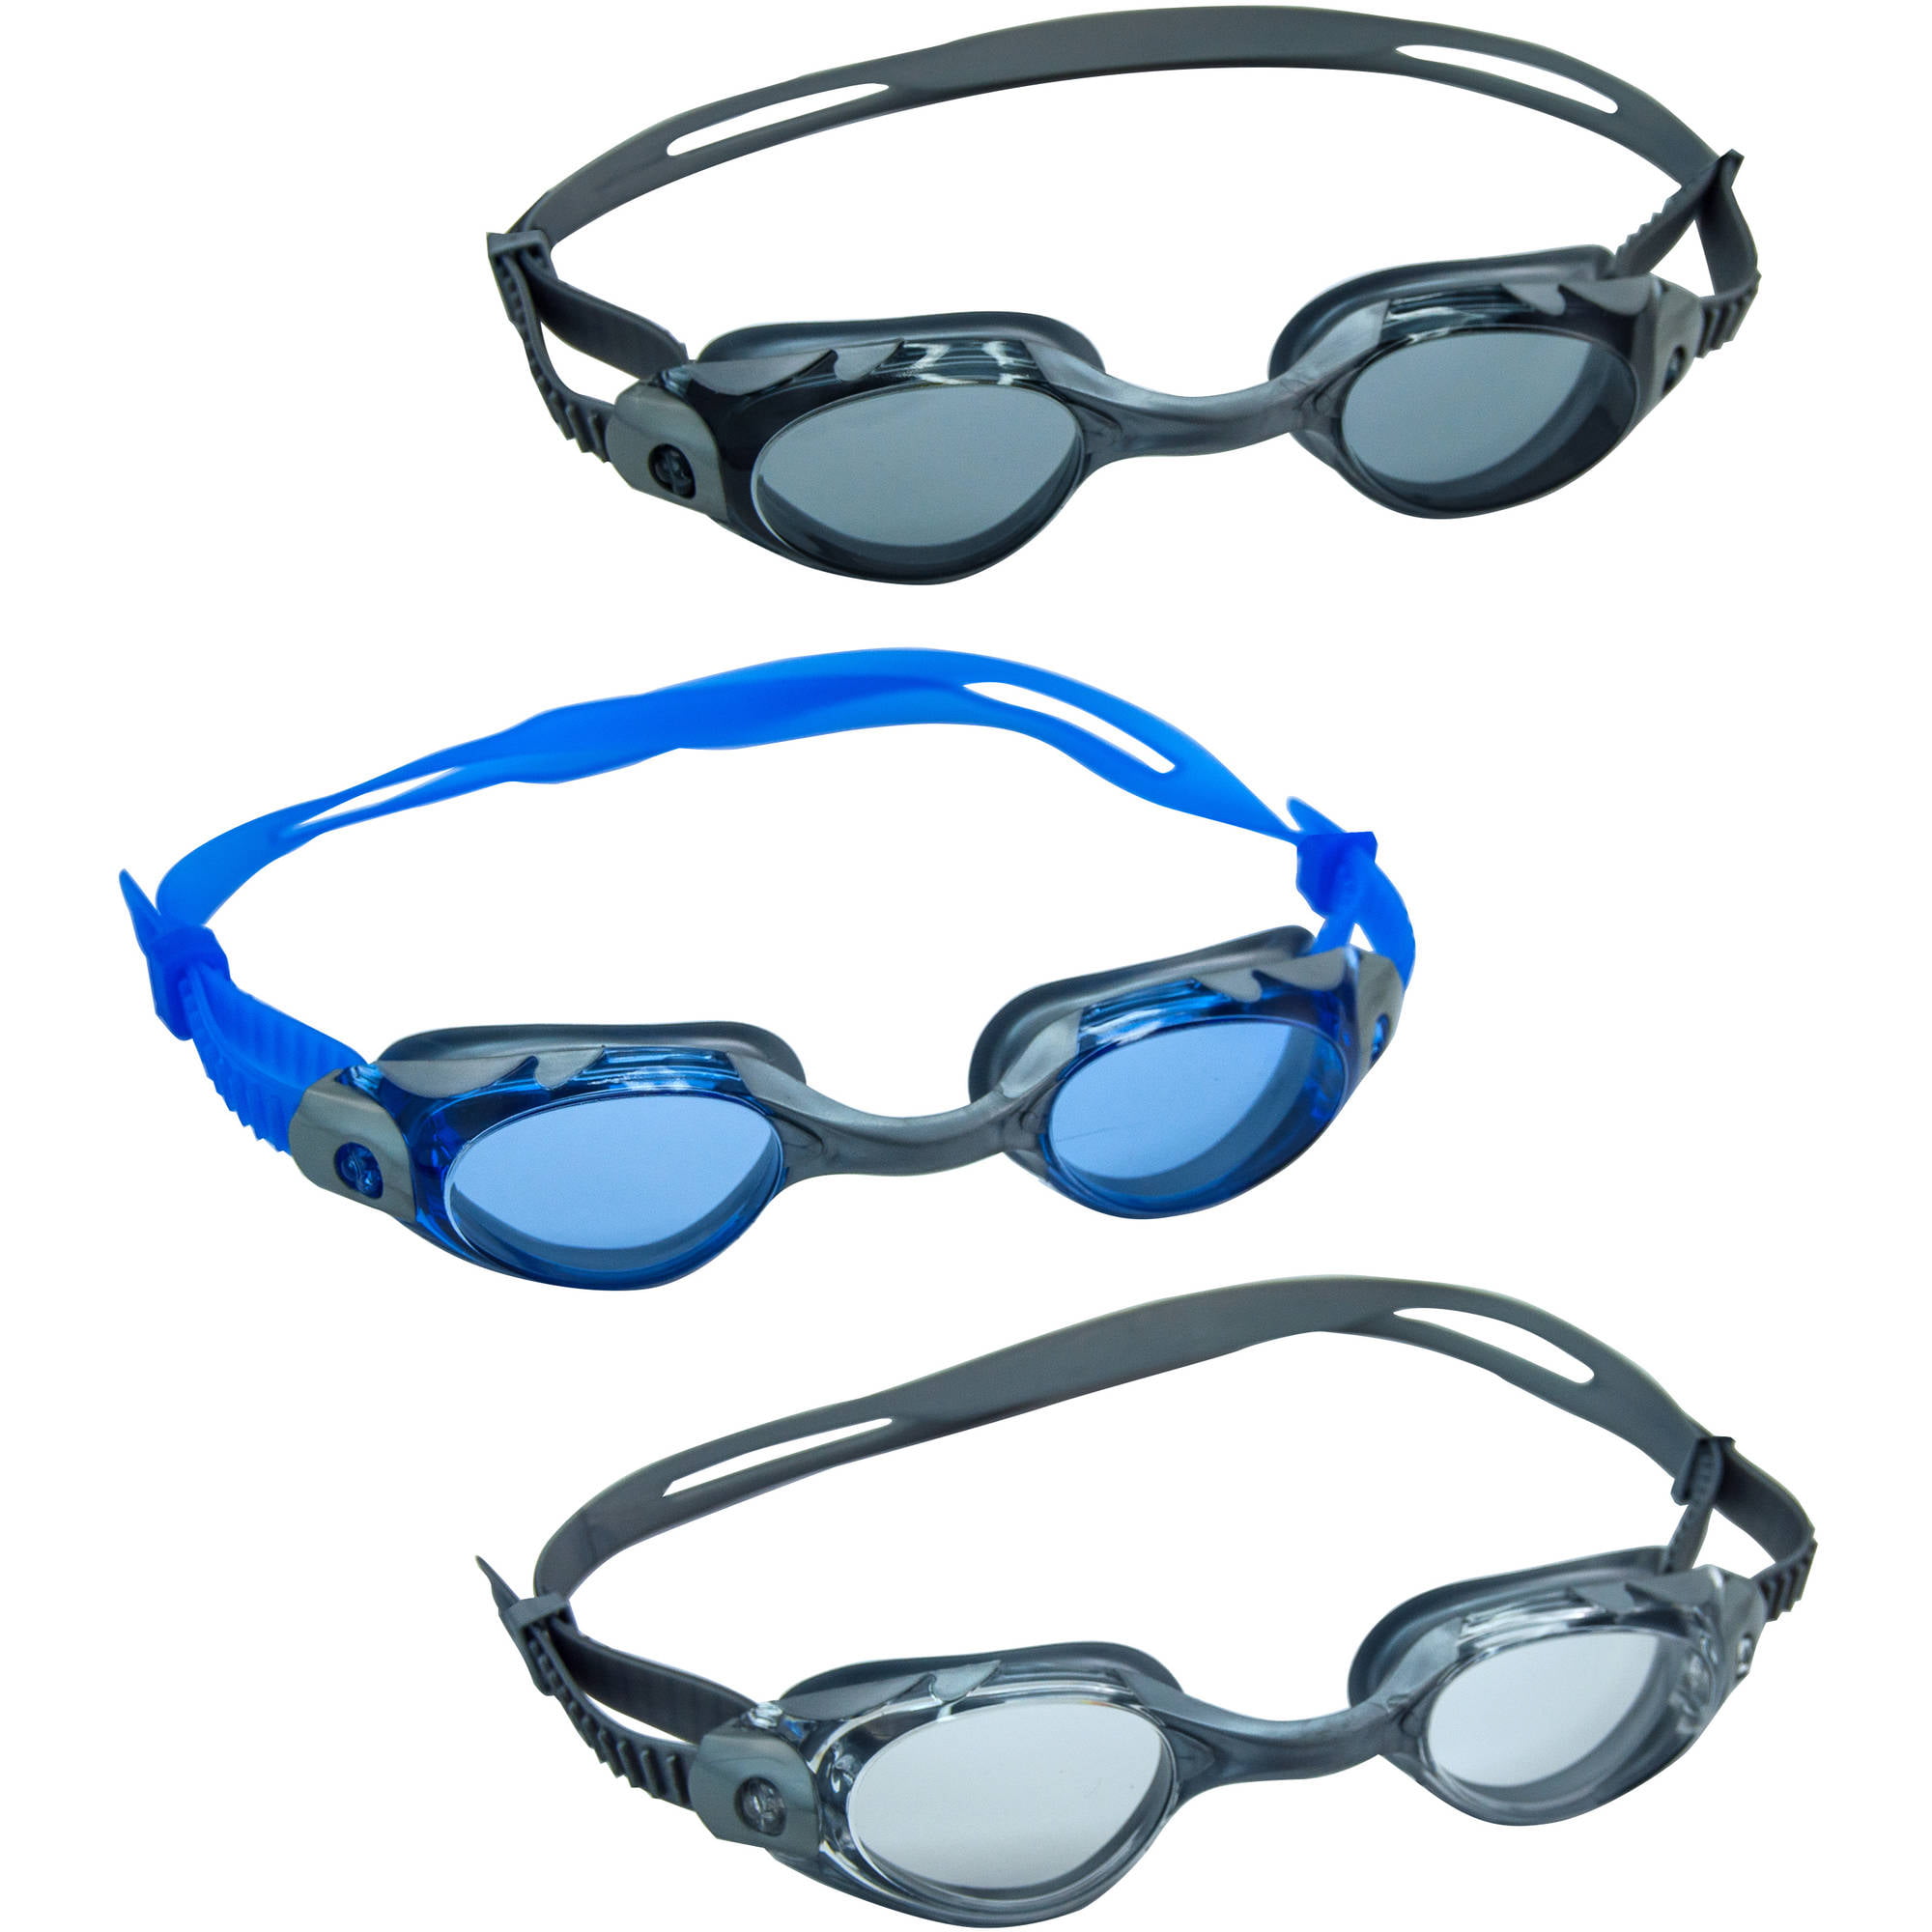 Dolfino Adult Swimming Goggles 3-Pack,&nbsp;Grey, Blue and Black&nbsp; with Tinted Lenses